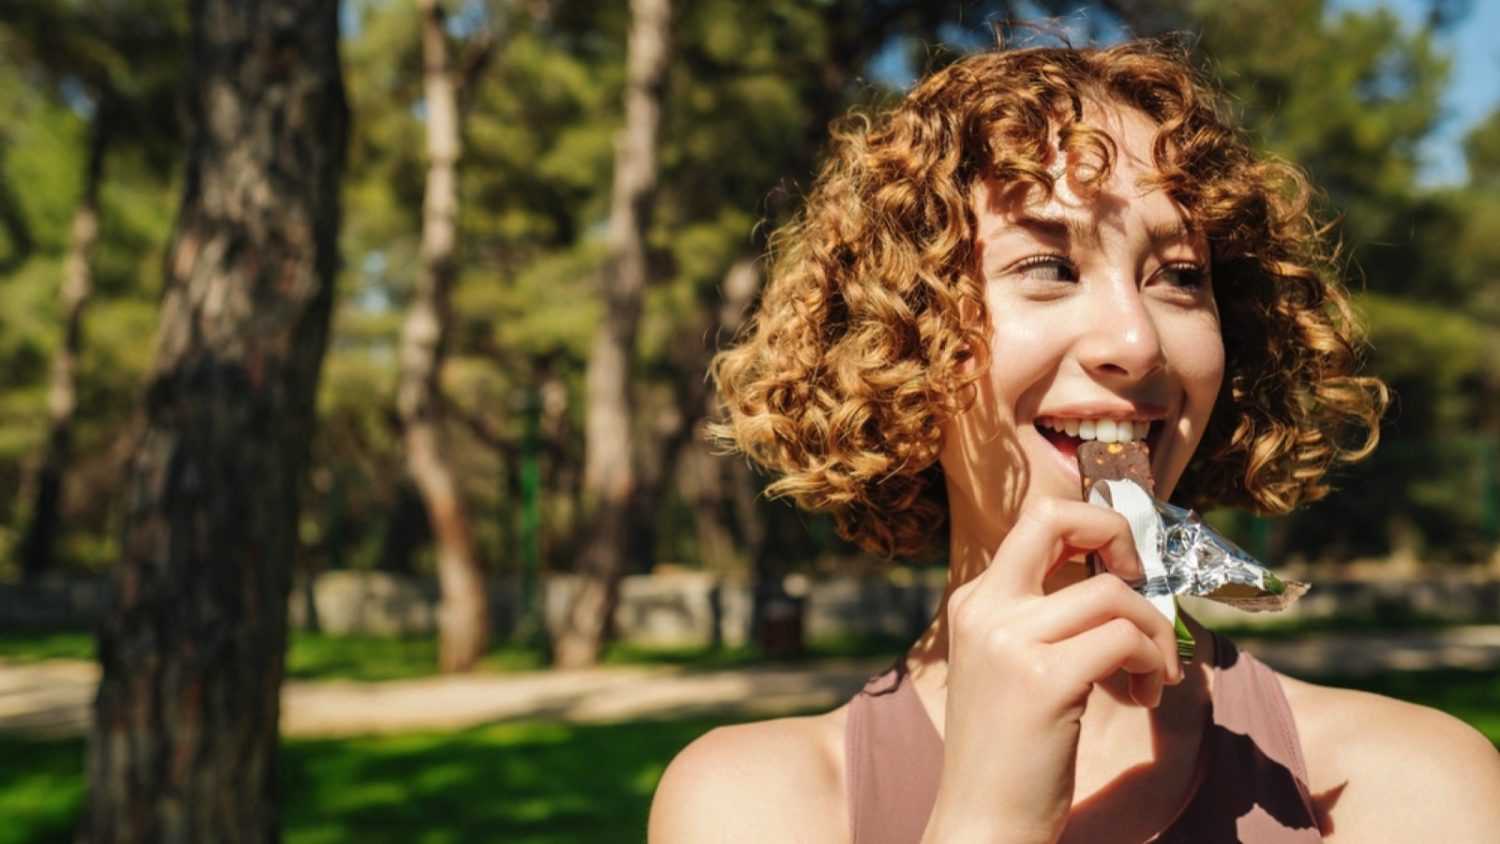 Woman eating Protein Bar